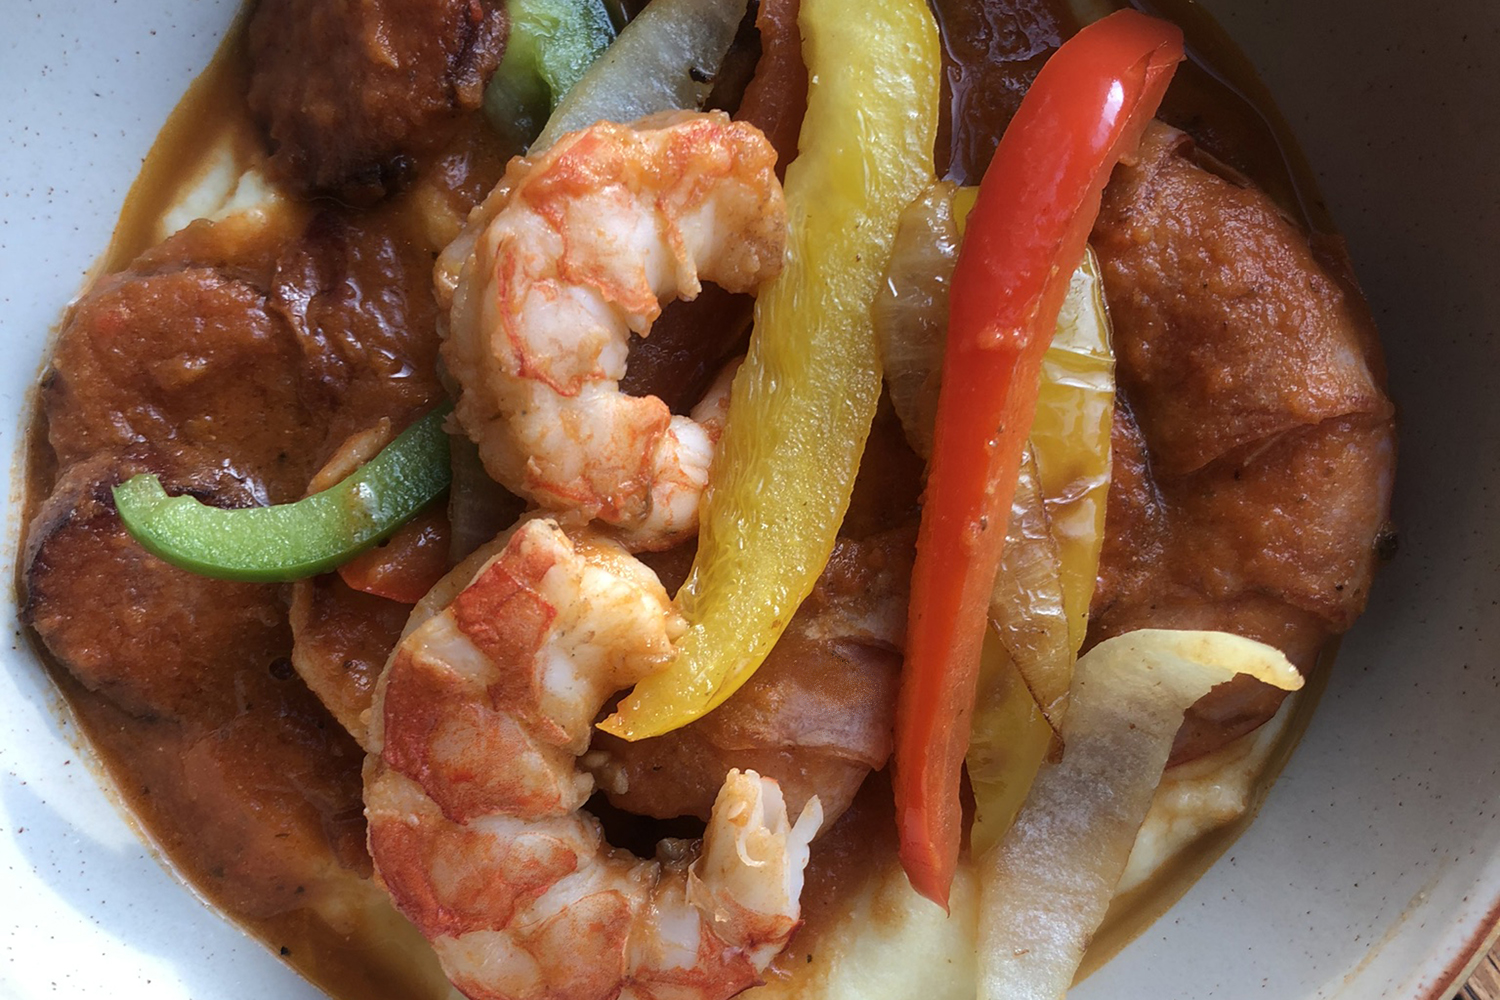 Illustration of Virginia's Shrimp and Grits with three cooked shrimp, sliced sausage, red, yellow and green sliced peppers.